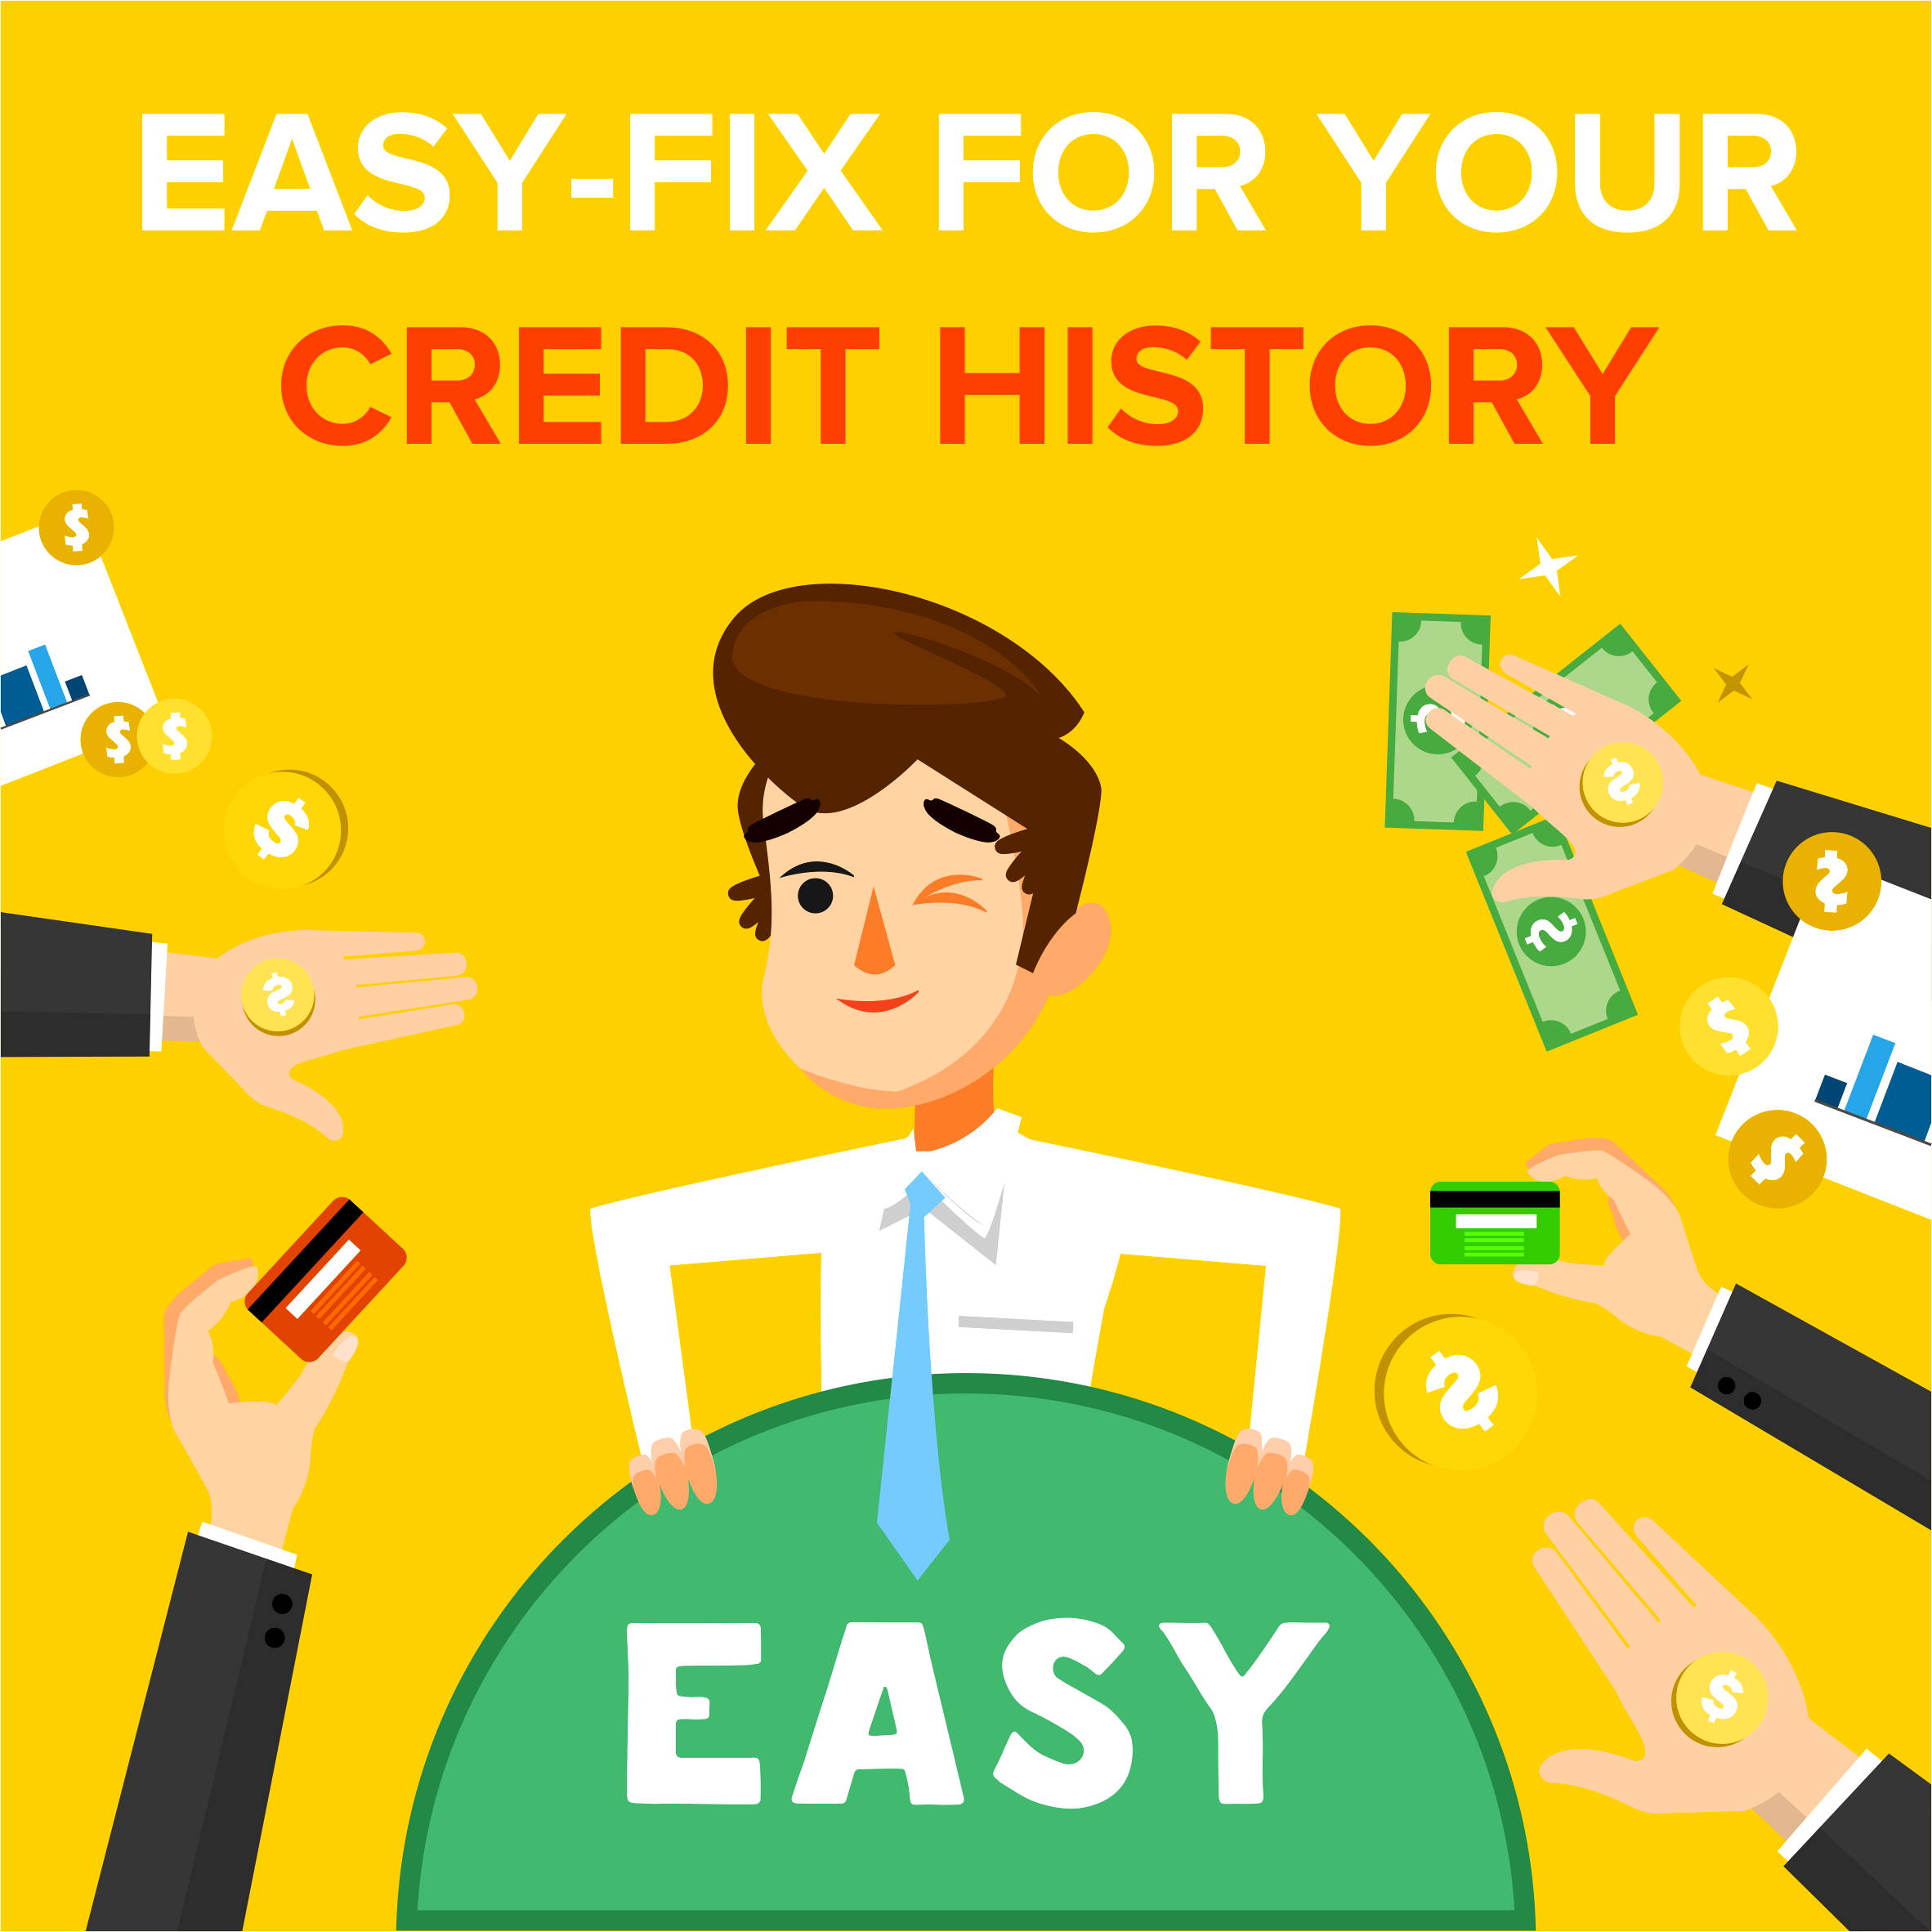 Easy-fix for Your Credit History